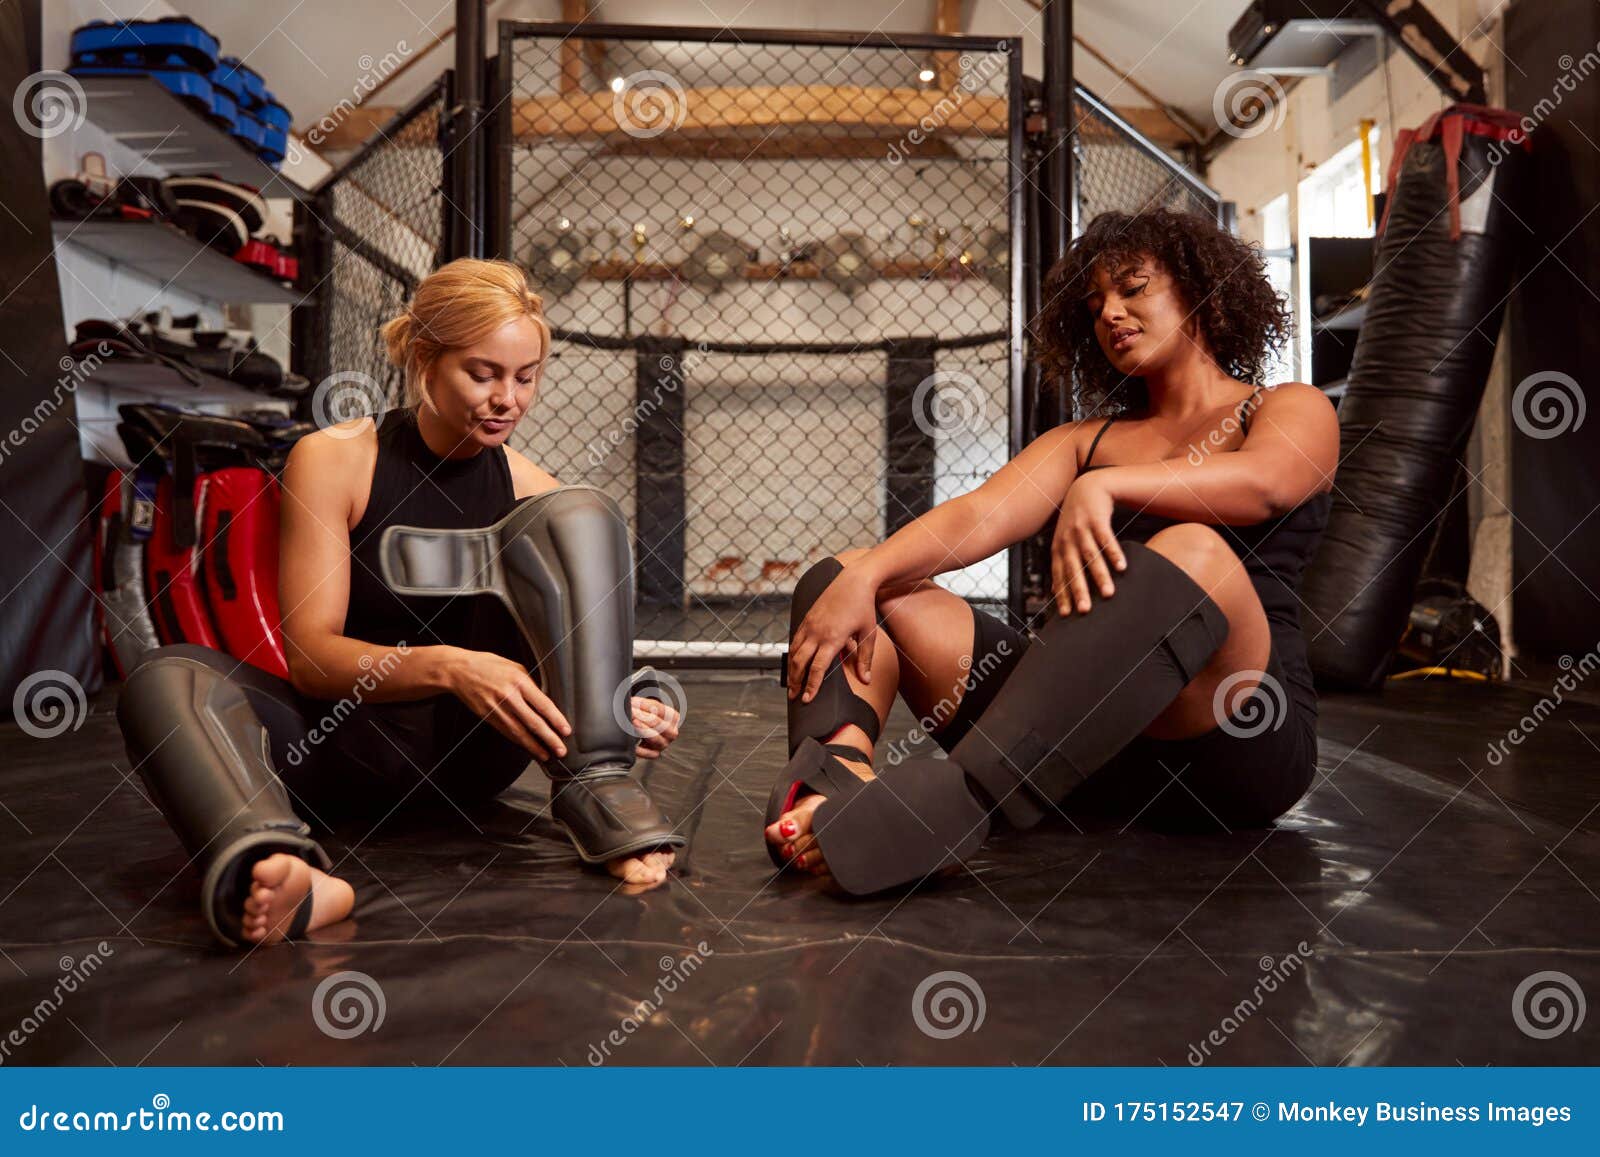 Two Female Mixed Martial Arts Fighters Putting Protective Equipment Training Gym 175152547 